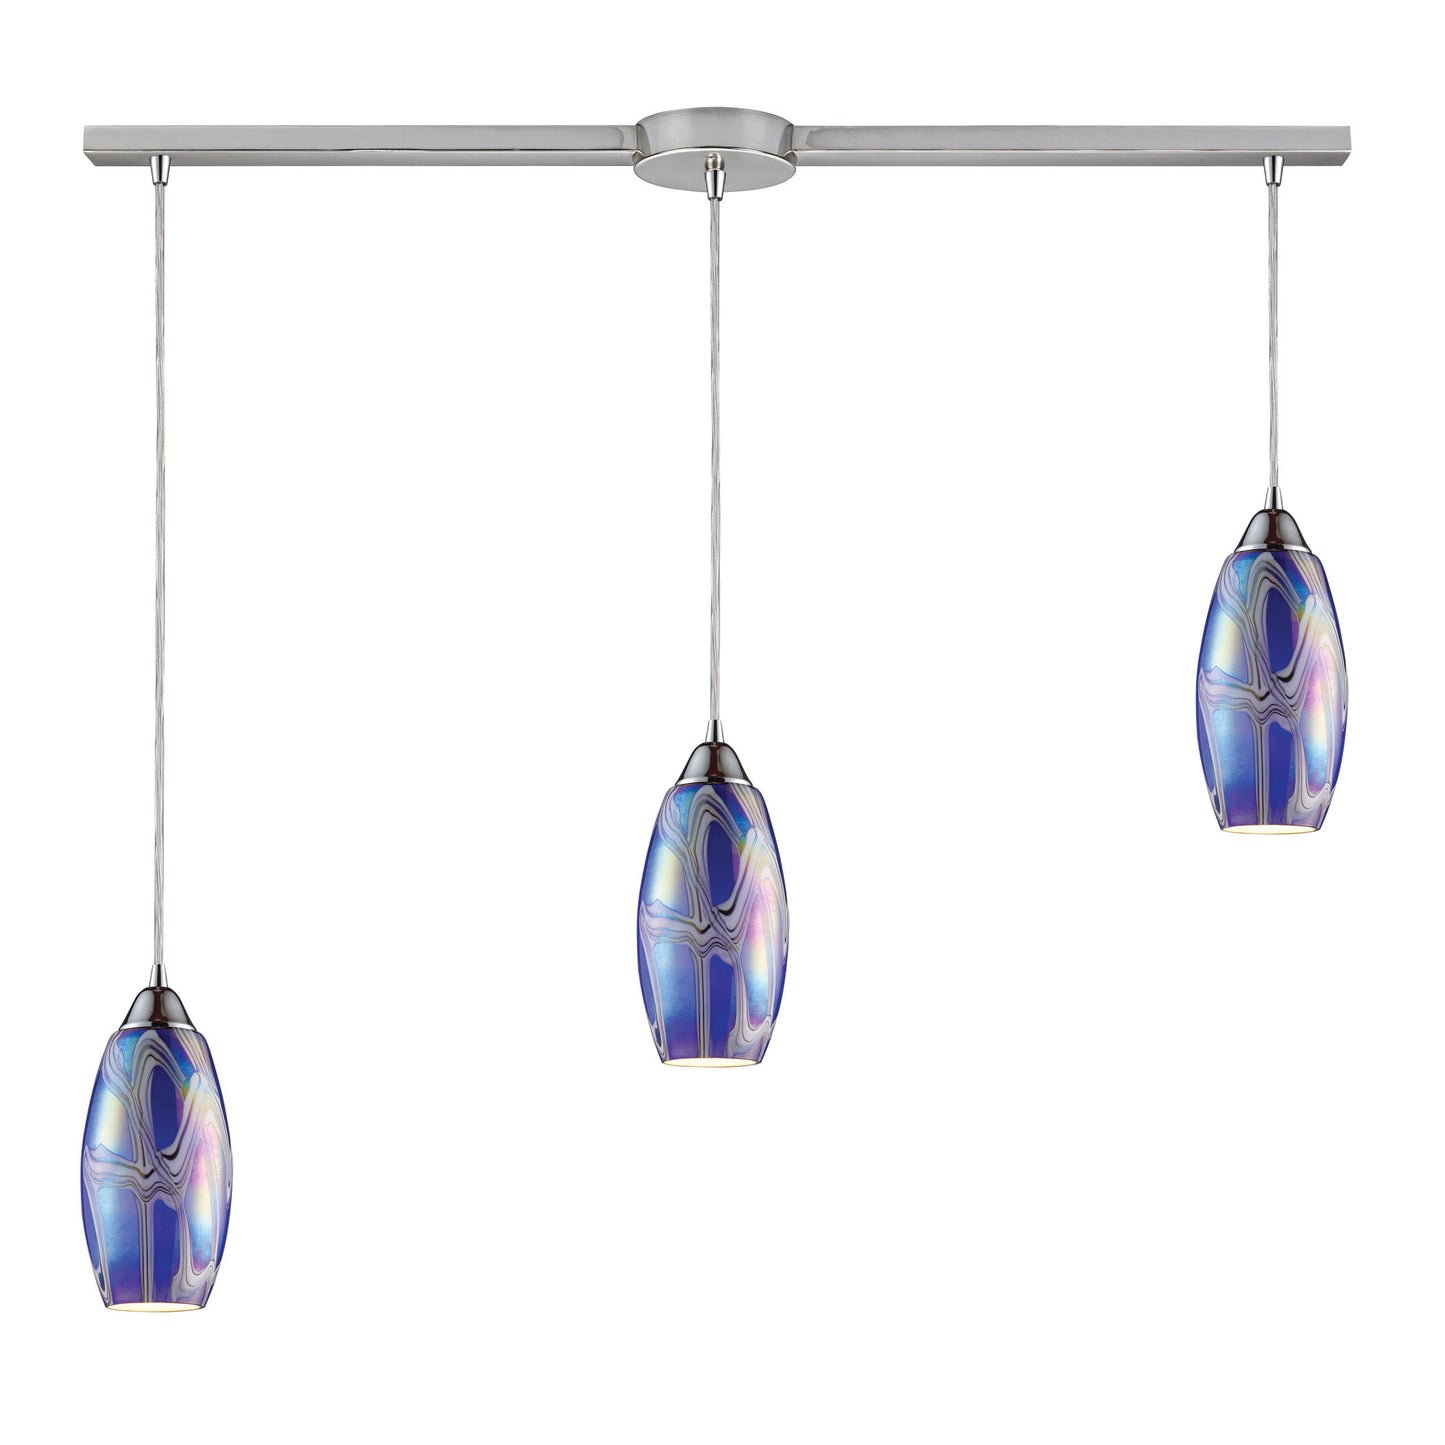 Iridescence 3-Light Linear Pendant Fixture in Satin Nickel with Storm Blue Glass